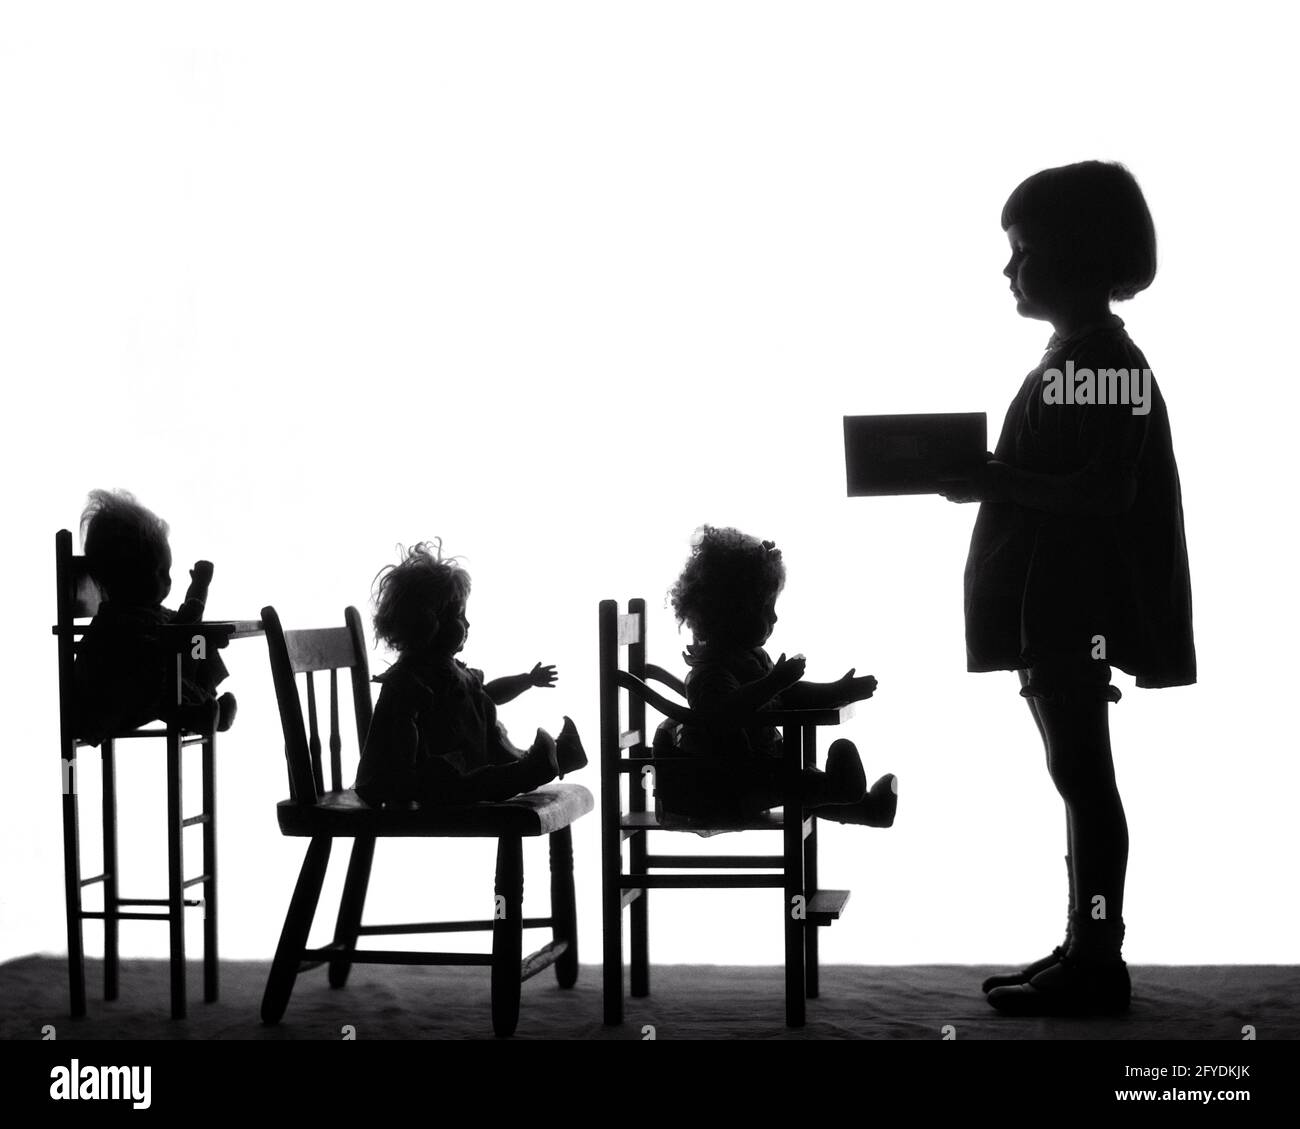 1920s SILHOUETTE OF LITTLE GIRL TEACHING READING TO DOLLS SITTING IN CHAIRS - s1782 HAR001 HARS SILHOUETTES B&W OUTLINE DREAMS HAPPINESS SILHOUETTED KNOWLEDGE LEADERSHIP OCCUPATIONS CONNECTION CONCEPTUAL IMAGINATION STYLISH ANONYMOUS GROWTH JUVENILES BLACK AND WHITE HAR001 OLD FASHIONED Stock Photo